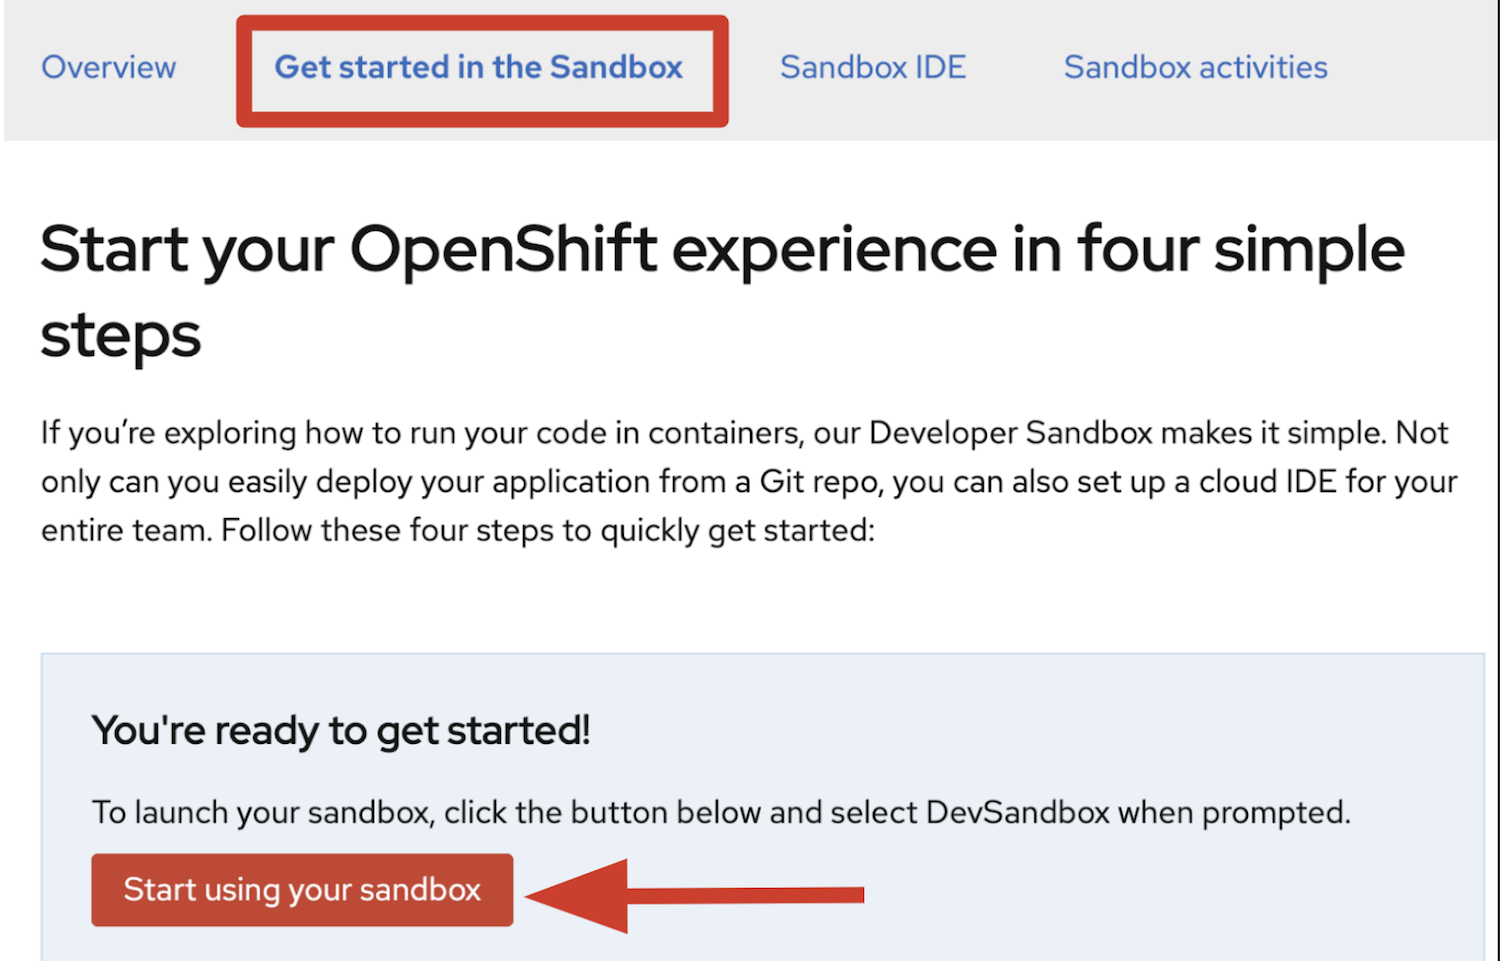 The 'Get started in the Sandbox' option is selected.